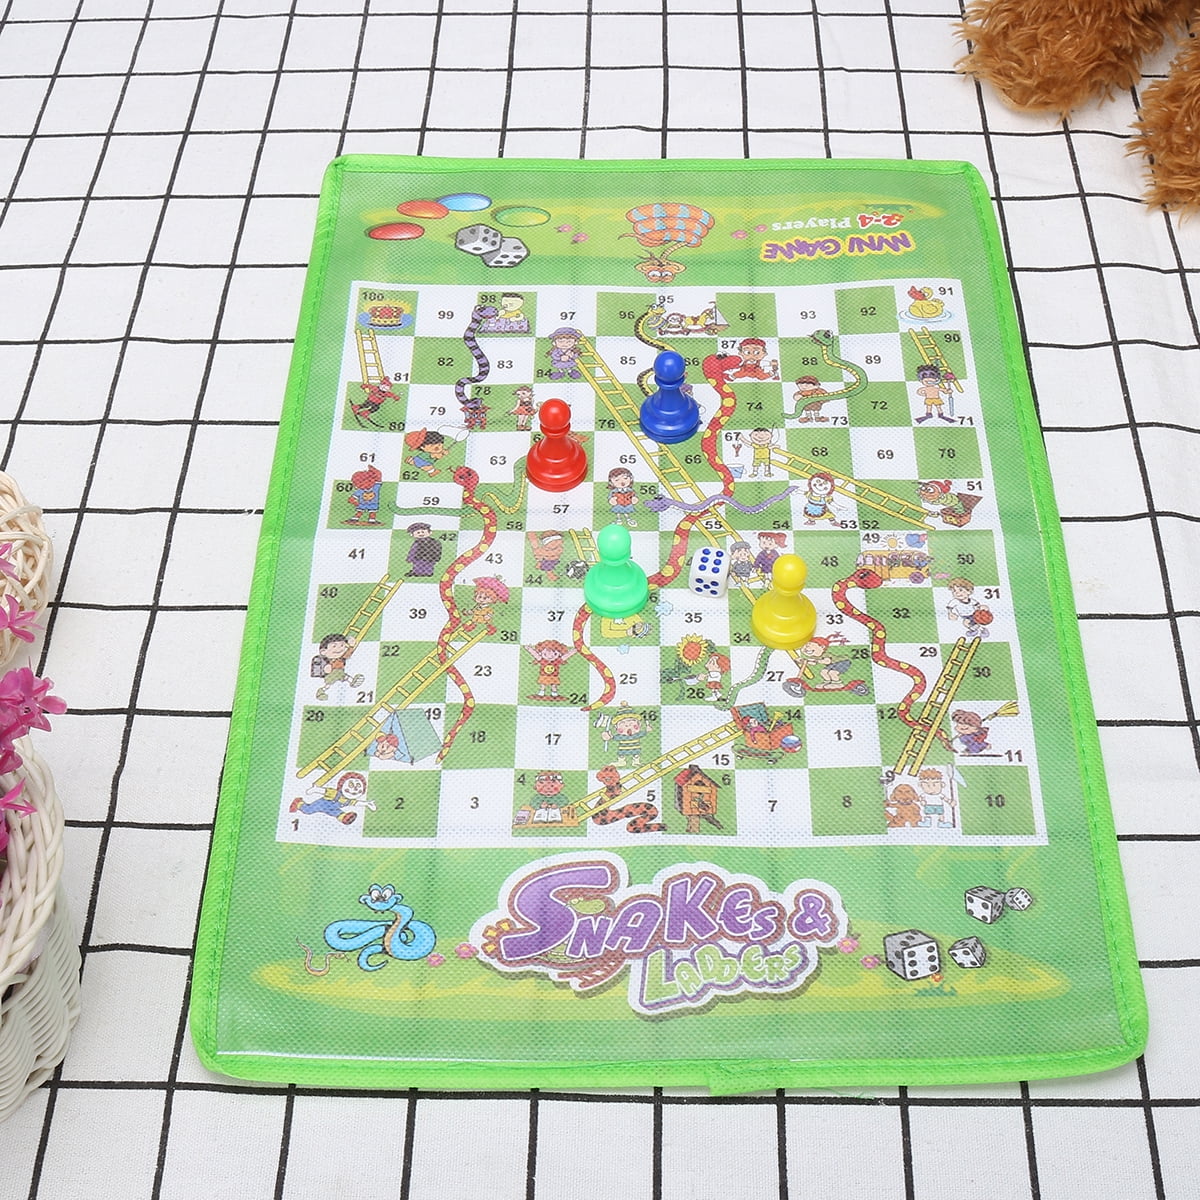 New Foldable Ludo Traditional Garden Games Sets Outdoor Giant Mat Fun Activities 